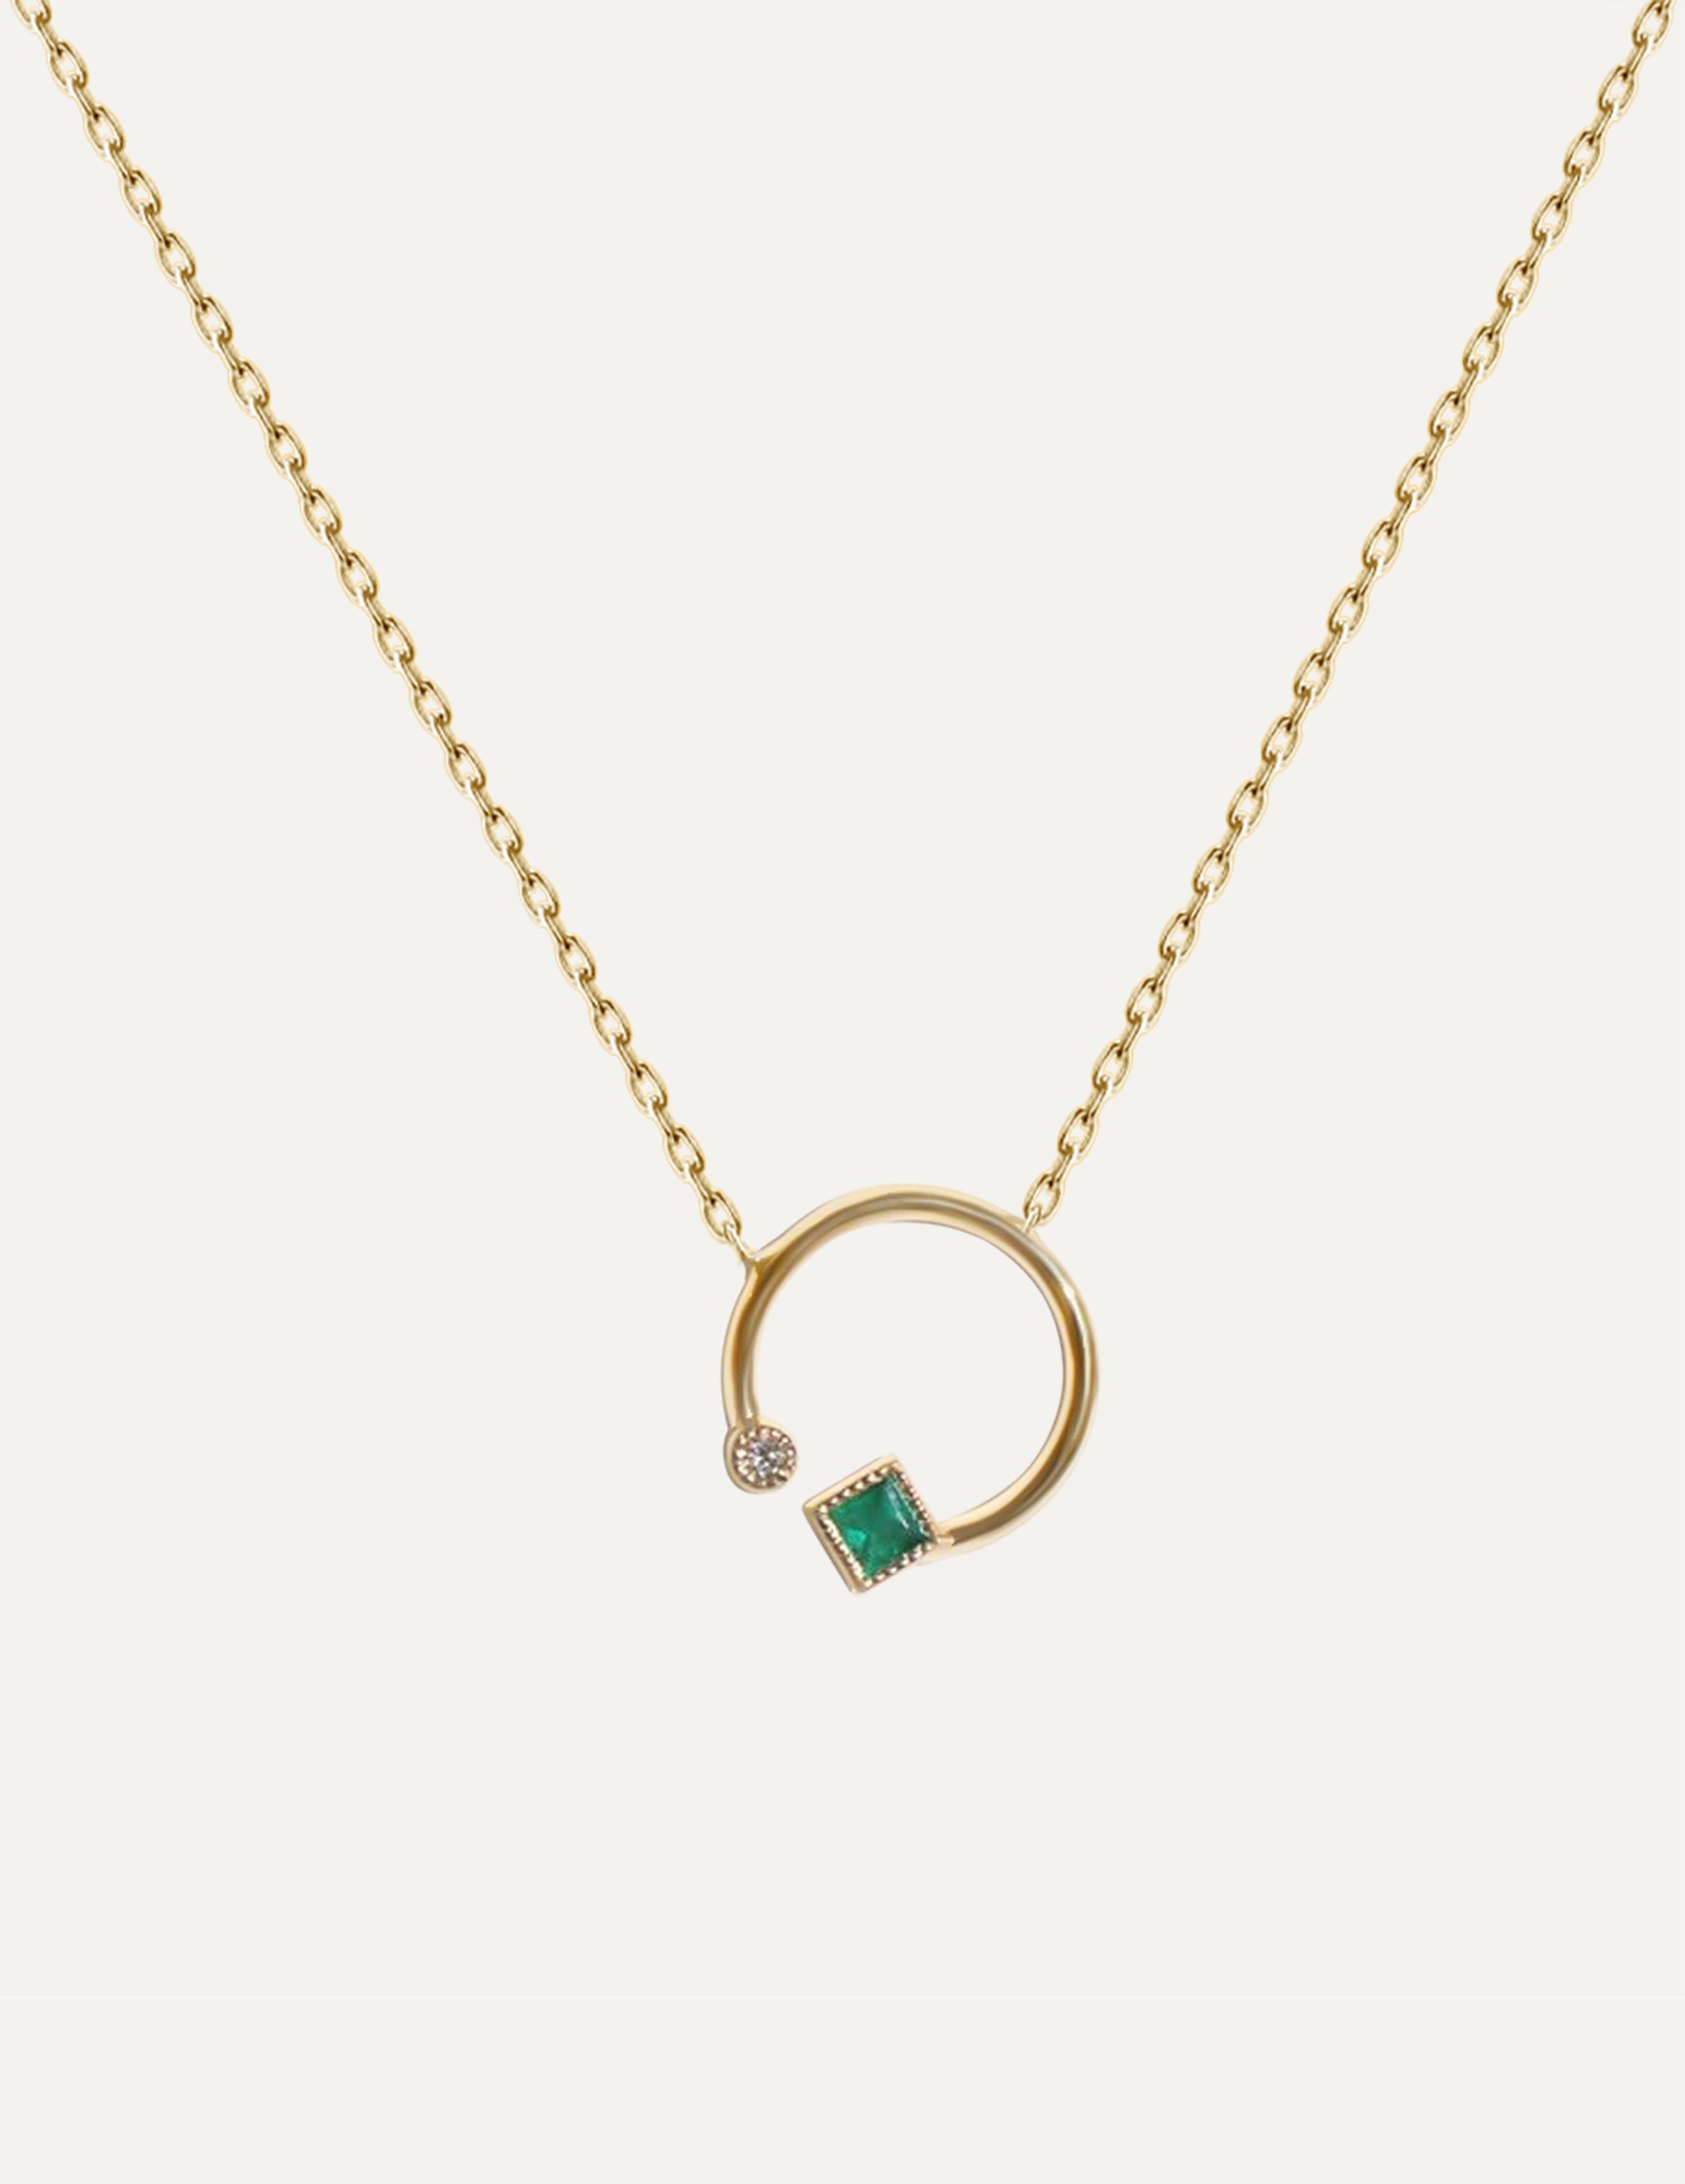 The Dainty Emerald Necklace is a remarkable and striking jewelry piece that embodies the allure of nature's verdant beauty. This necklace features a design that showcases open space within the pendant, allowing the vibrant green emerald to breathe